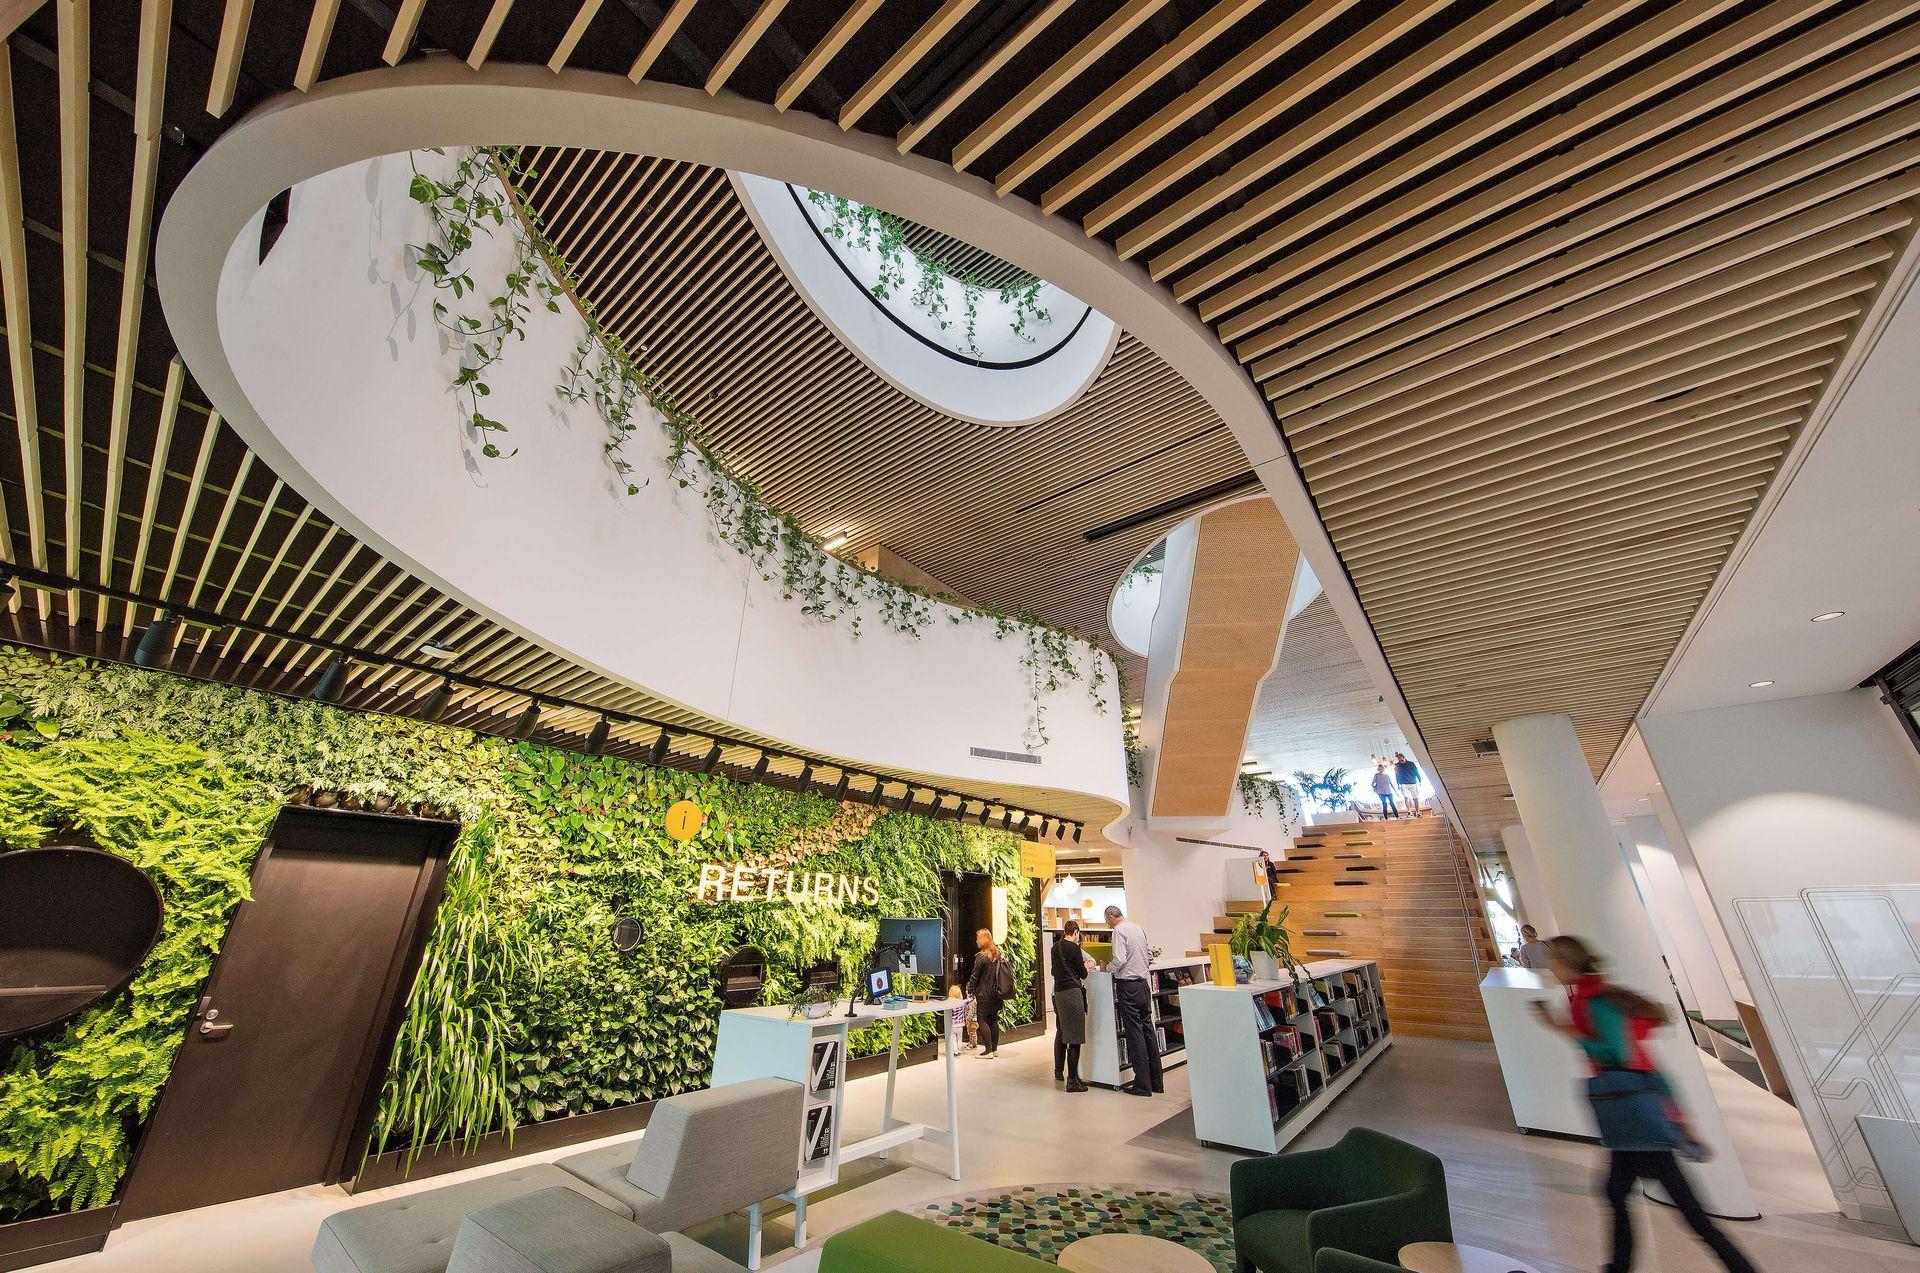 Biophilic design incorporates the natural world into our manmade world.